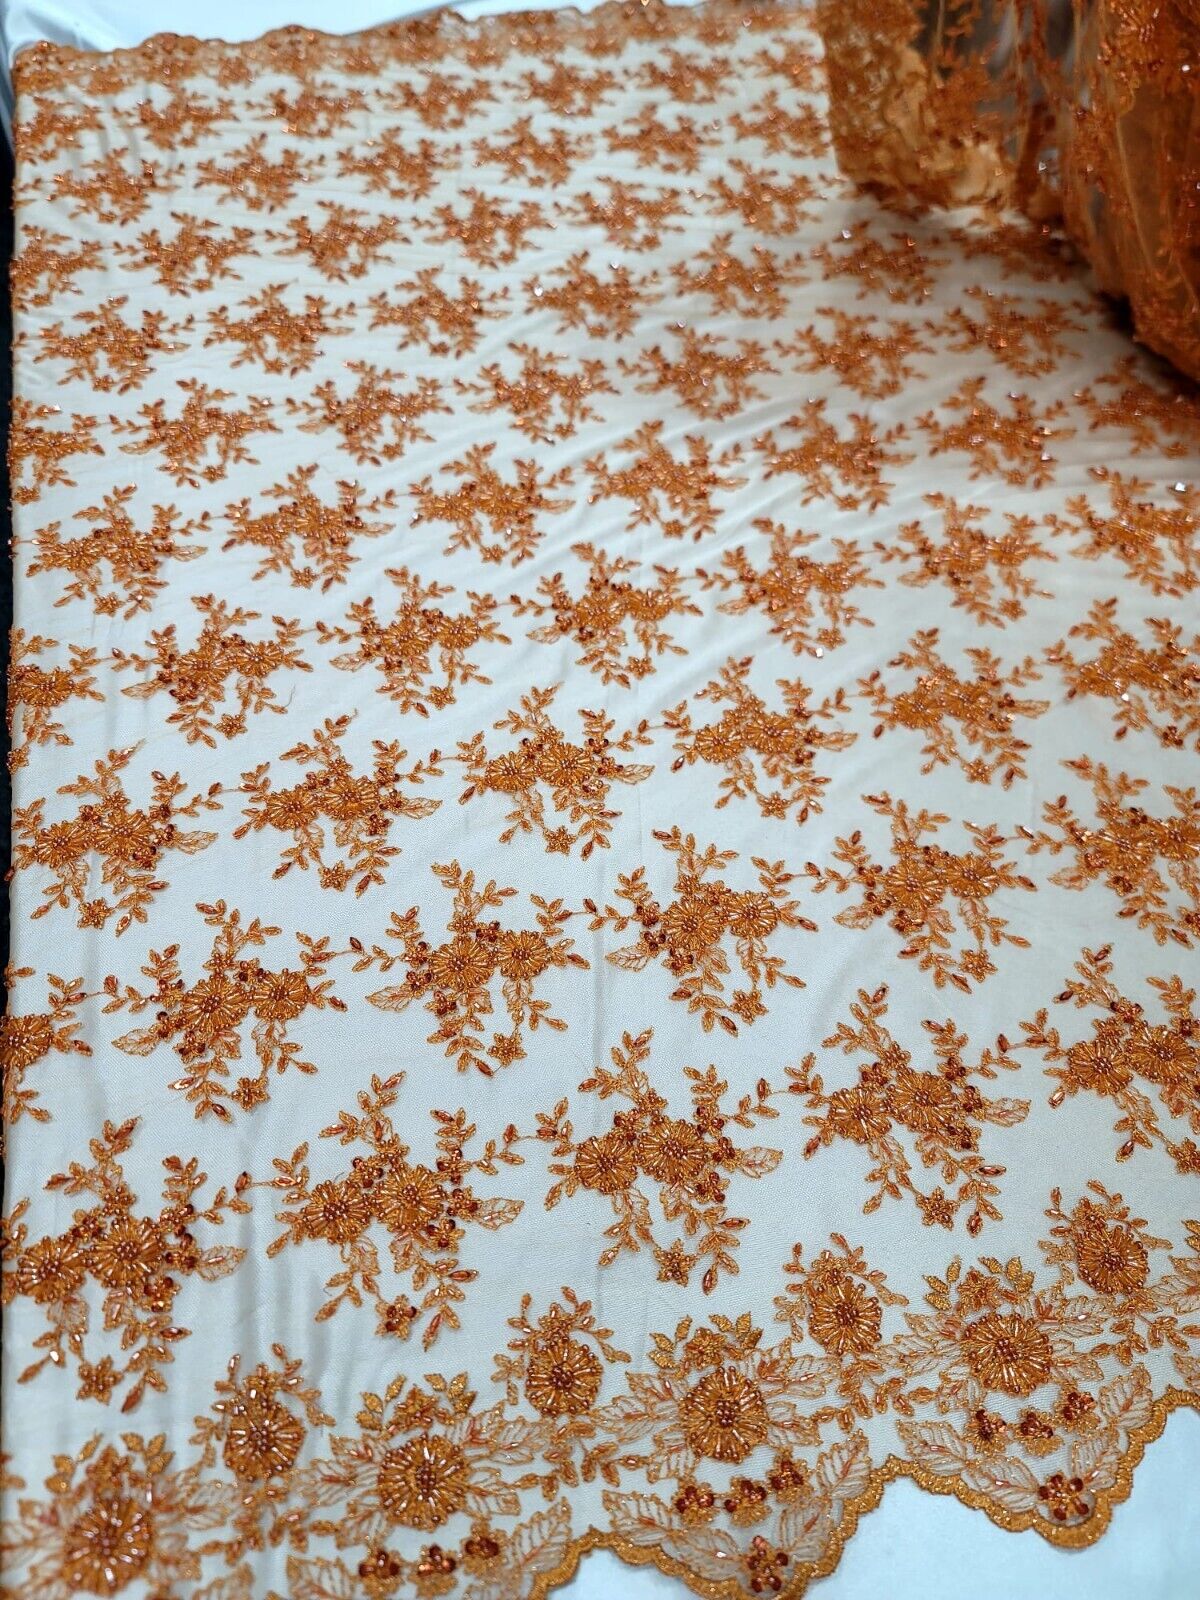 Orange Embroidery Lace Floral Flowers Beaded Fabric By The Yard Scalloped Bridal